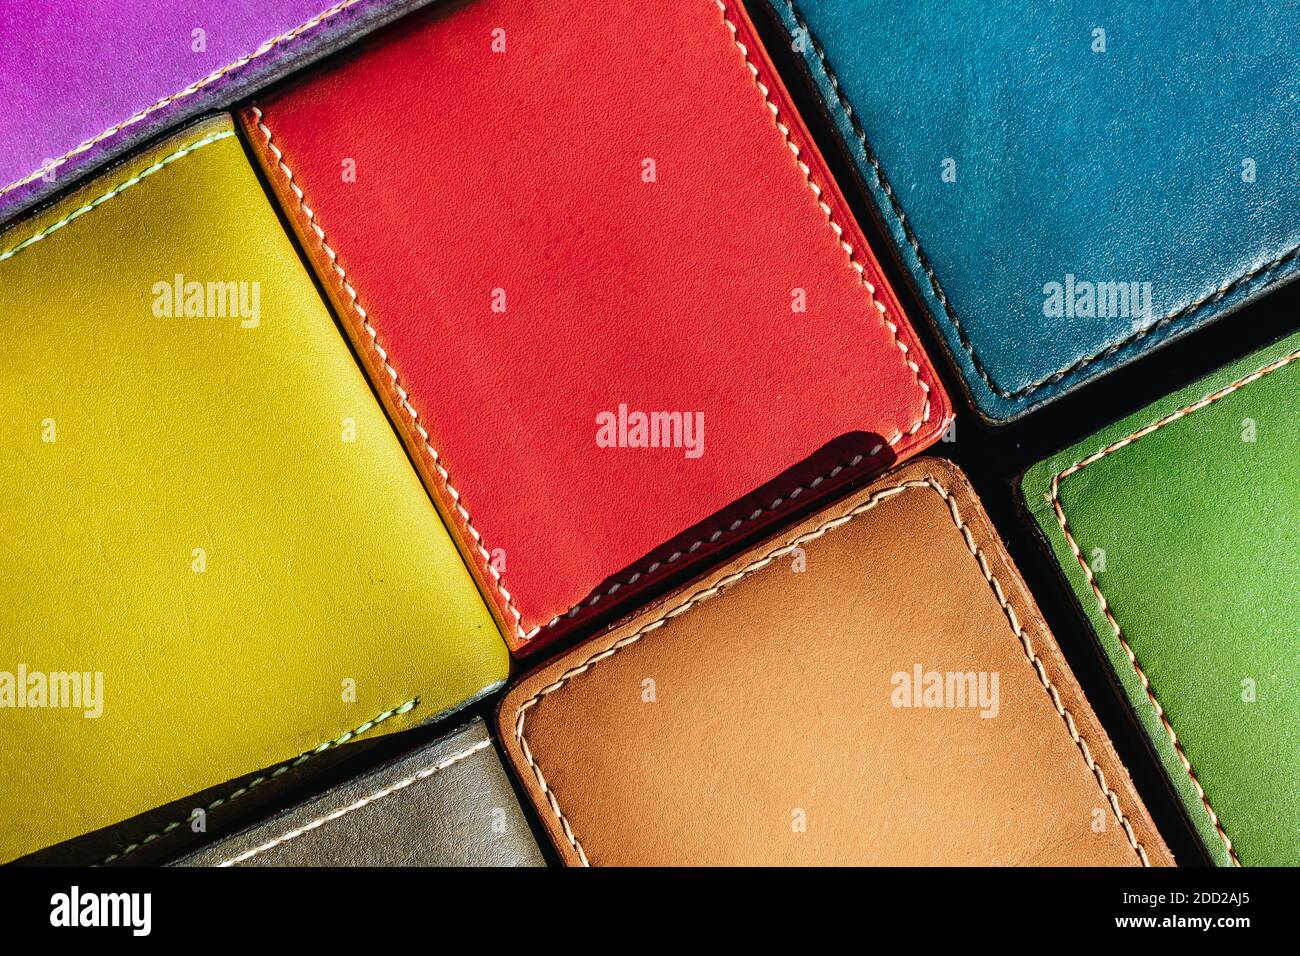 Handmade leather men's wallet. Multi-colored texture. Leather craft Stock Photo